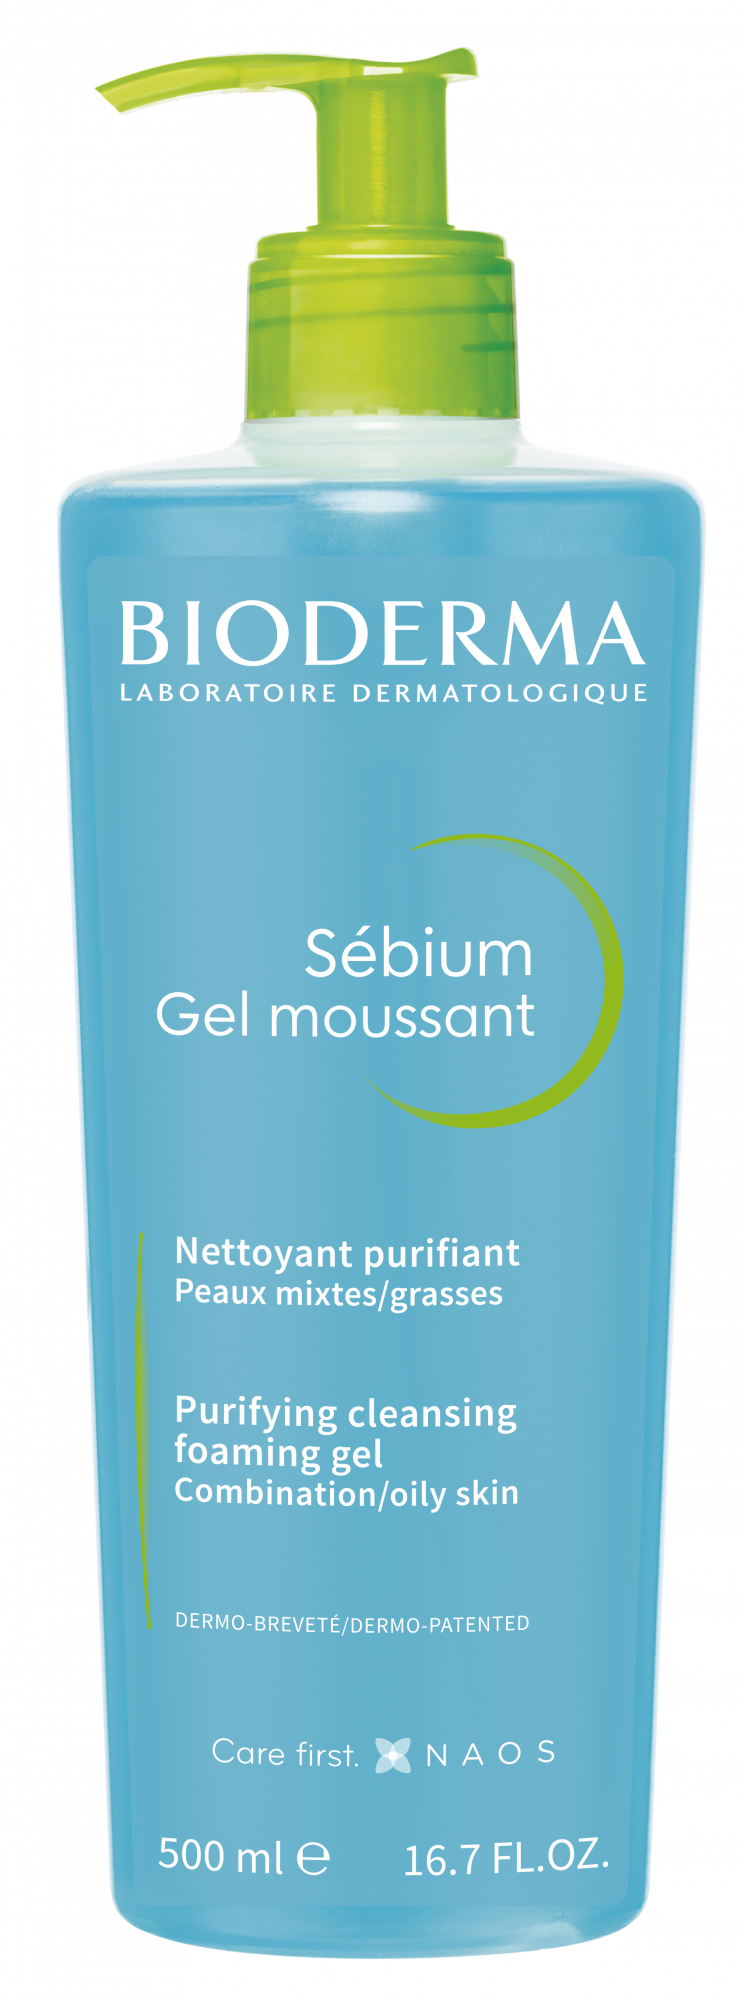 https://www.bioderma-india.in/sites/in/files/styles/fancybox_2000_2000/public/products/%7B38491%7D_%7BBIO_SEBIUM_GEL_MOUSSANT%7D_%7B28664I%7D.png?itok=jPM2NlXs